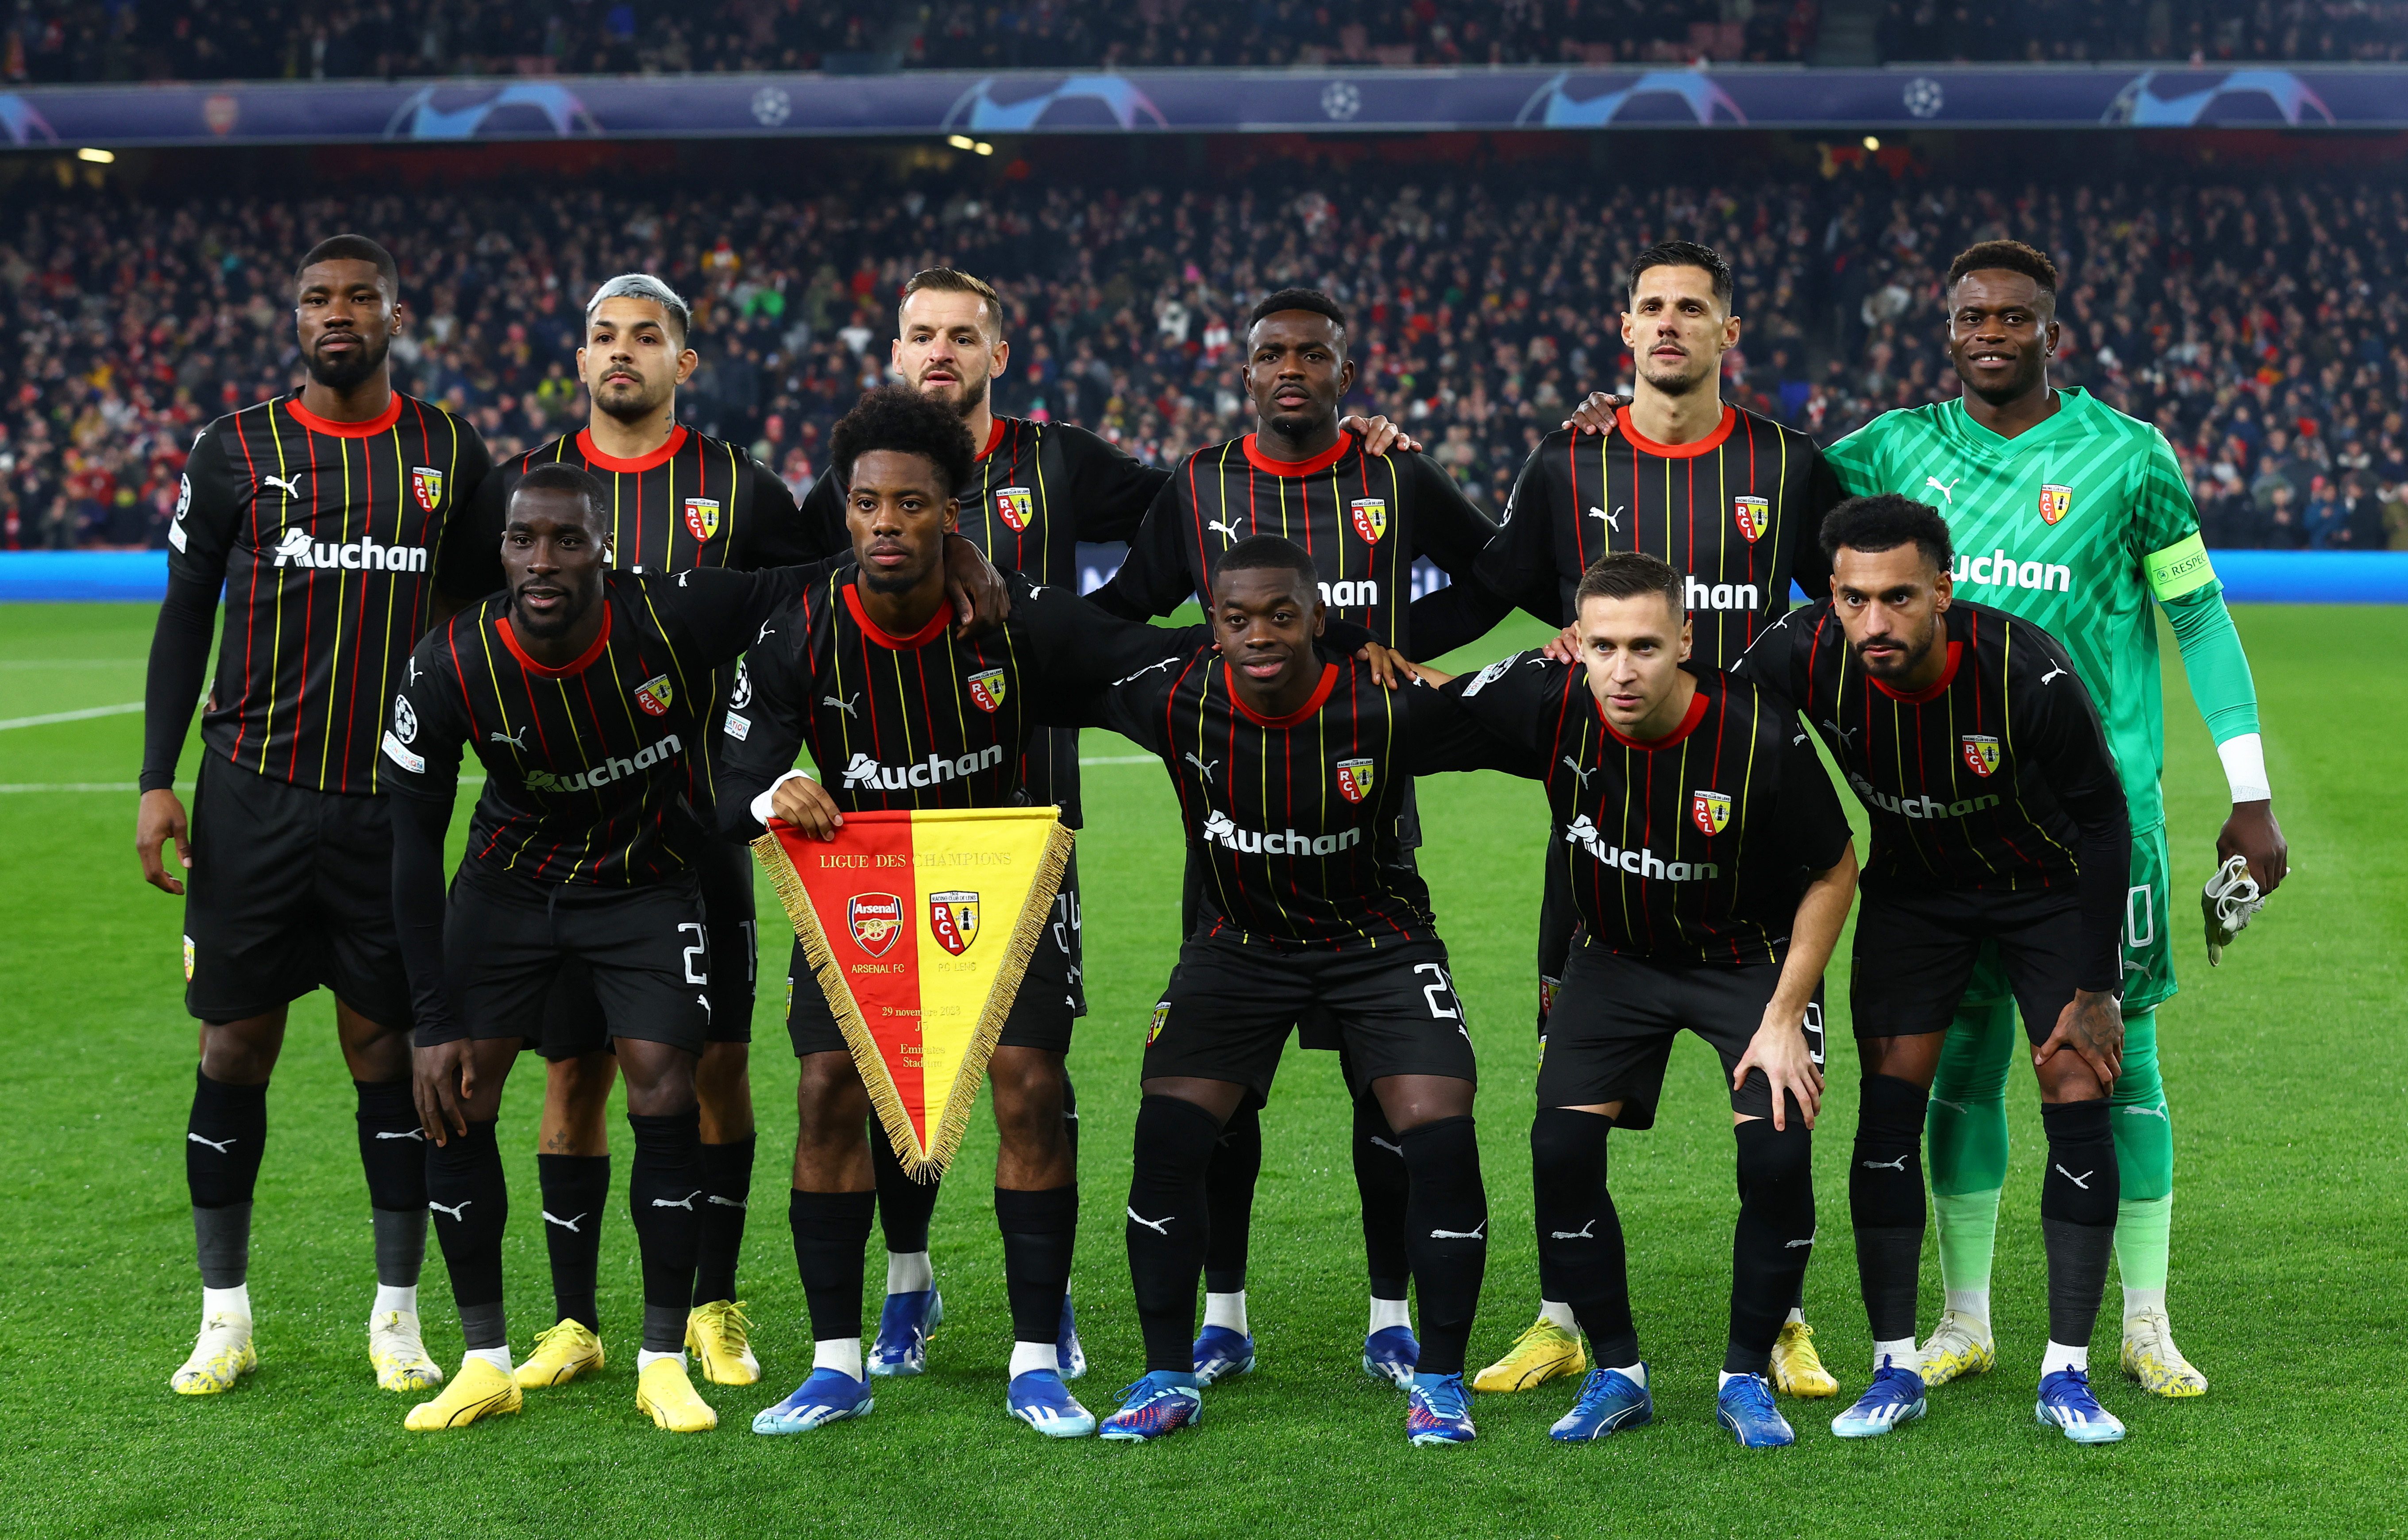 RC Lens comeback stuns Arsenal in Champions League